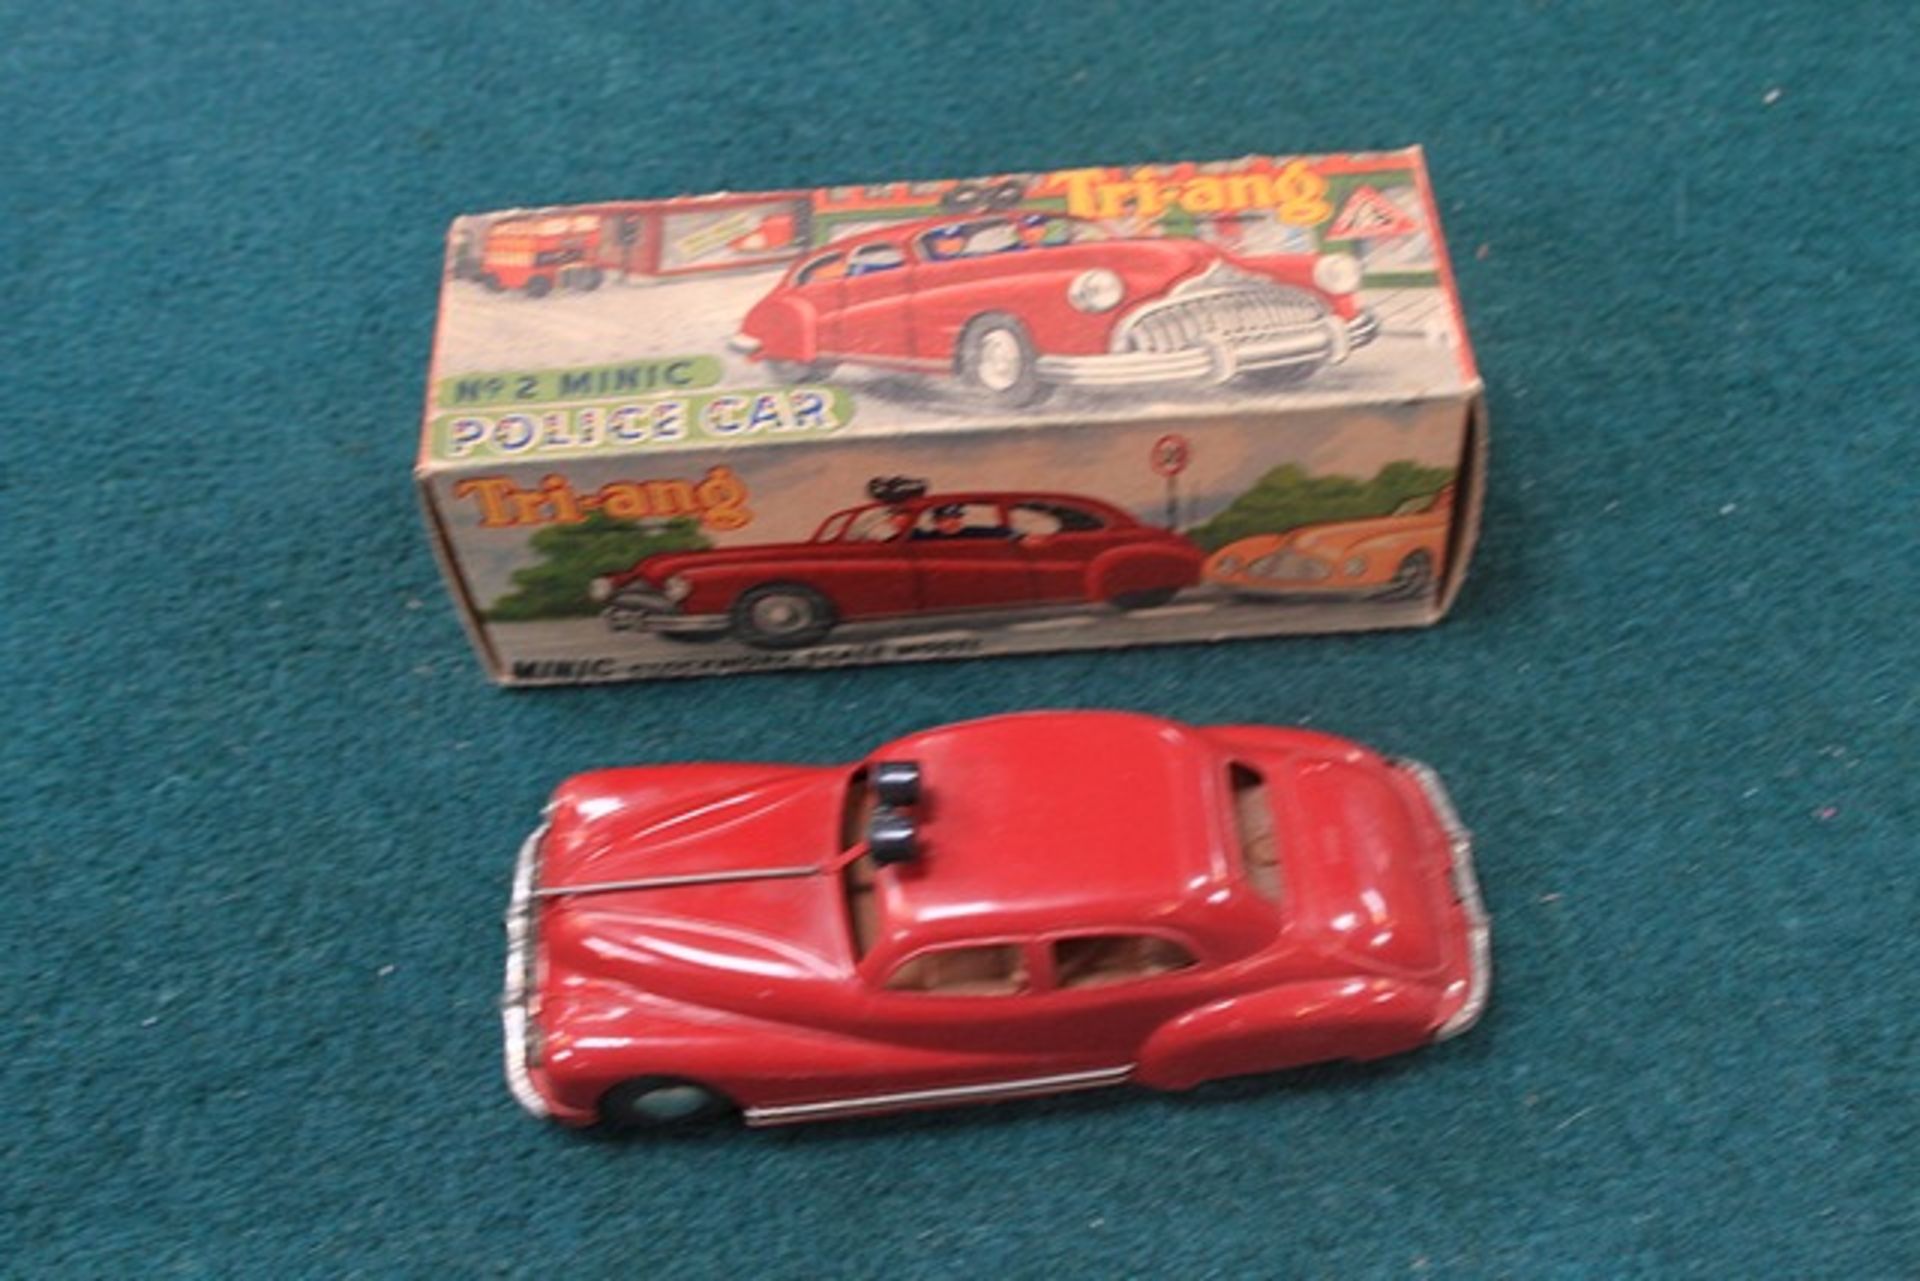 Triang No2 Minic Police Car - Very Rare Early Model Made By Bros Ltd London Complete With Box